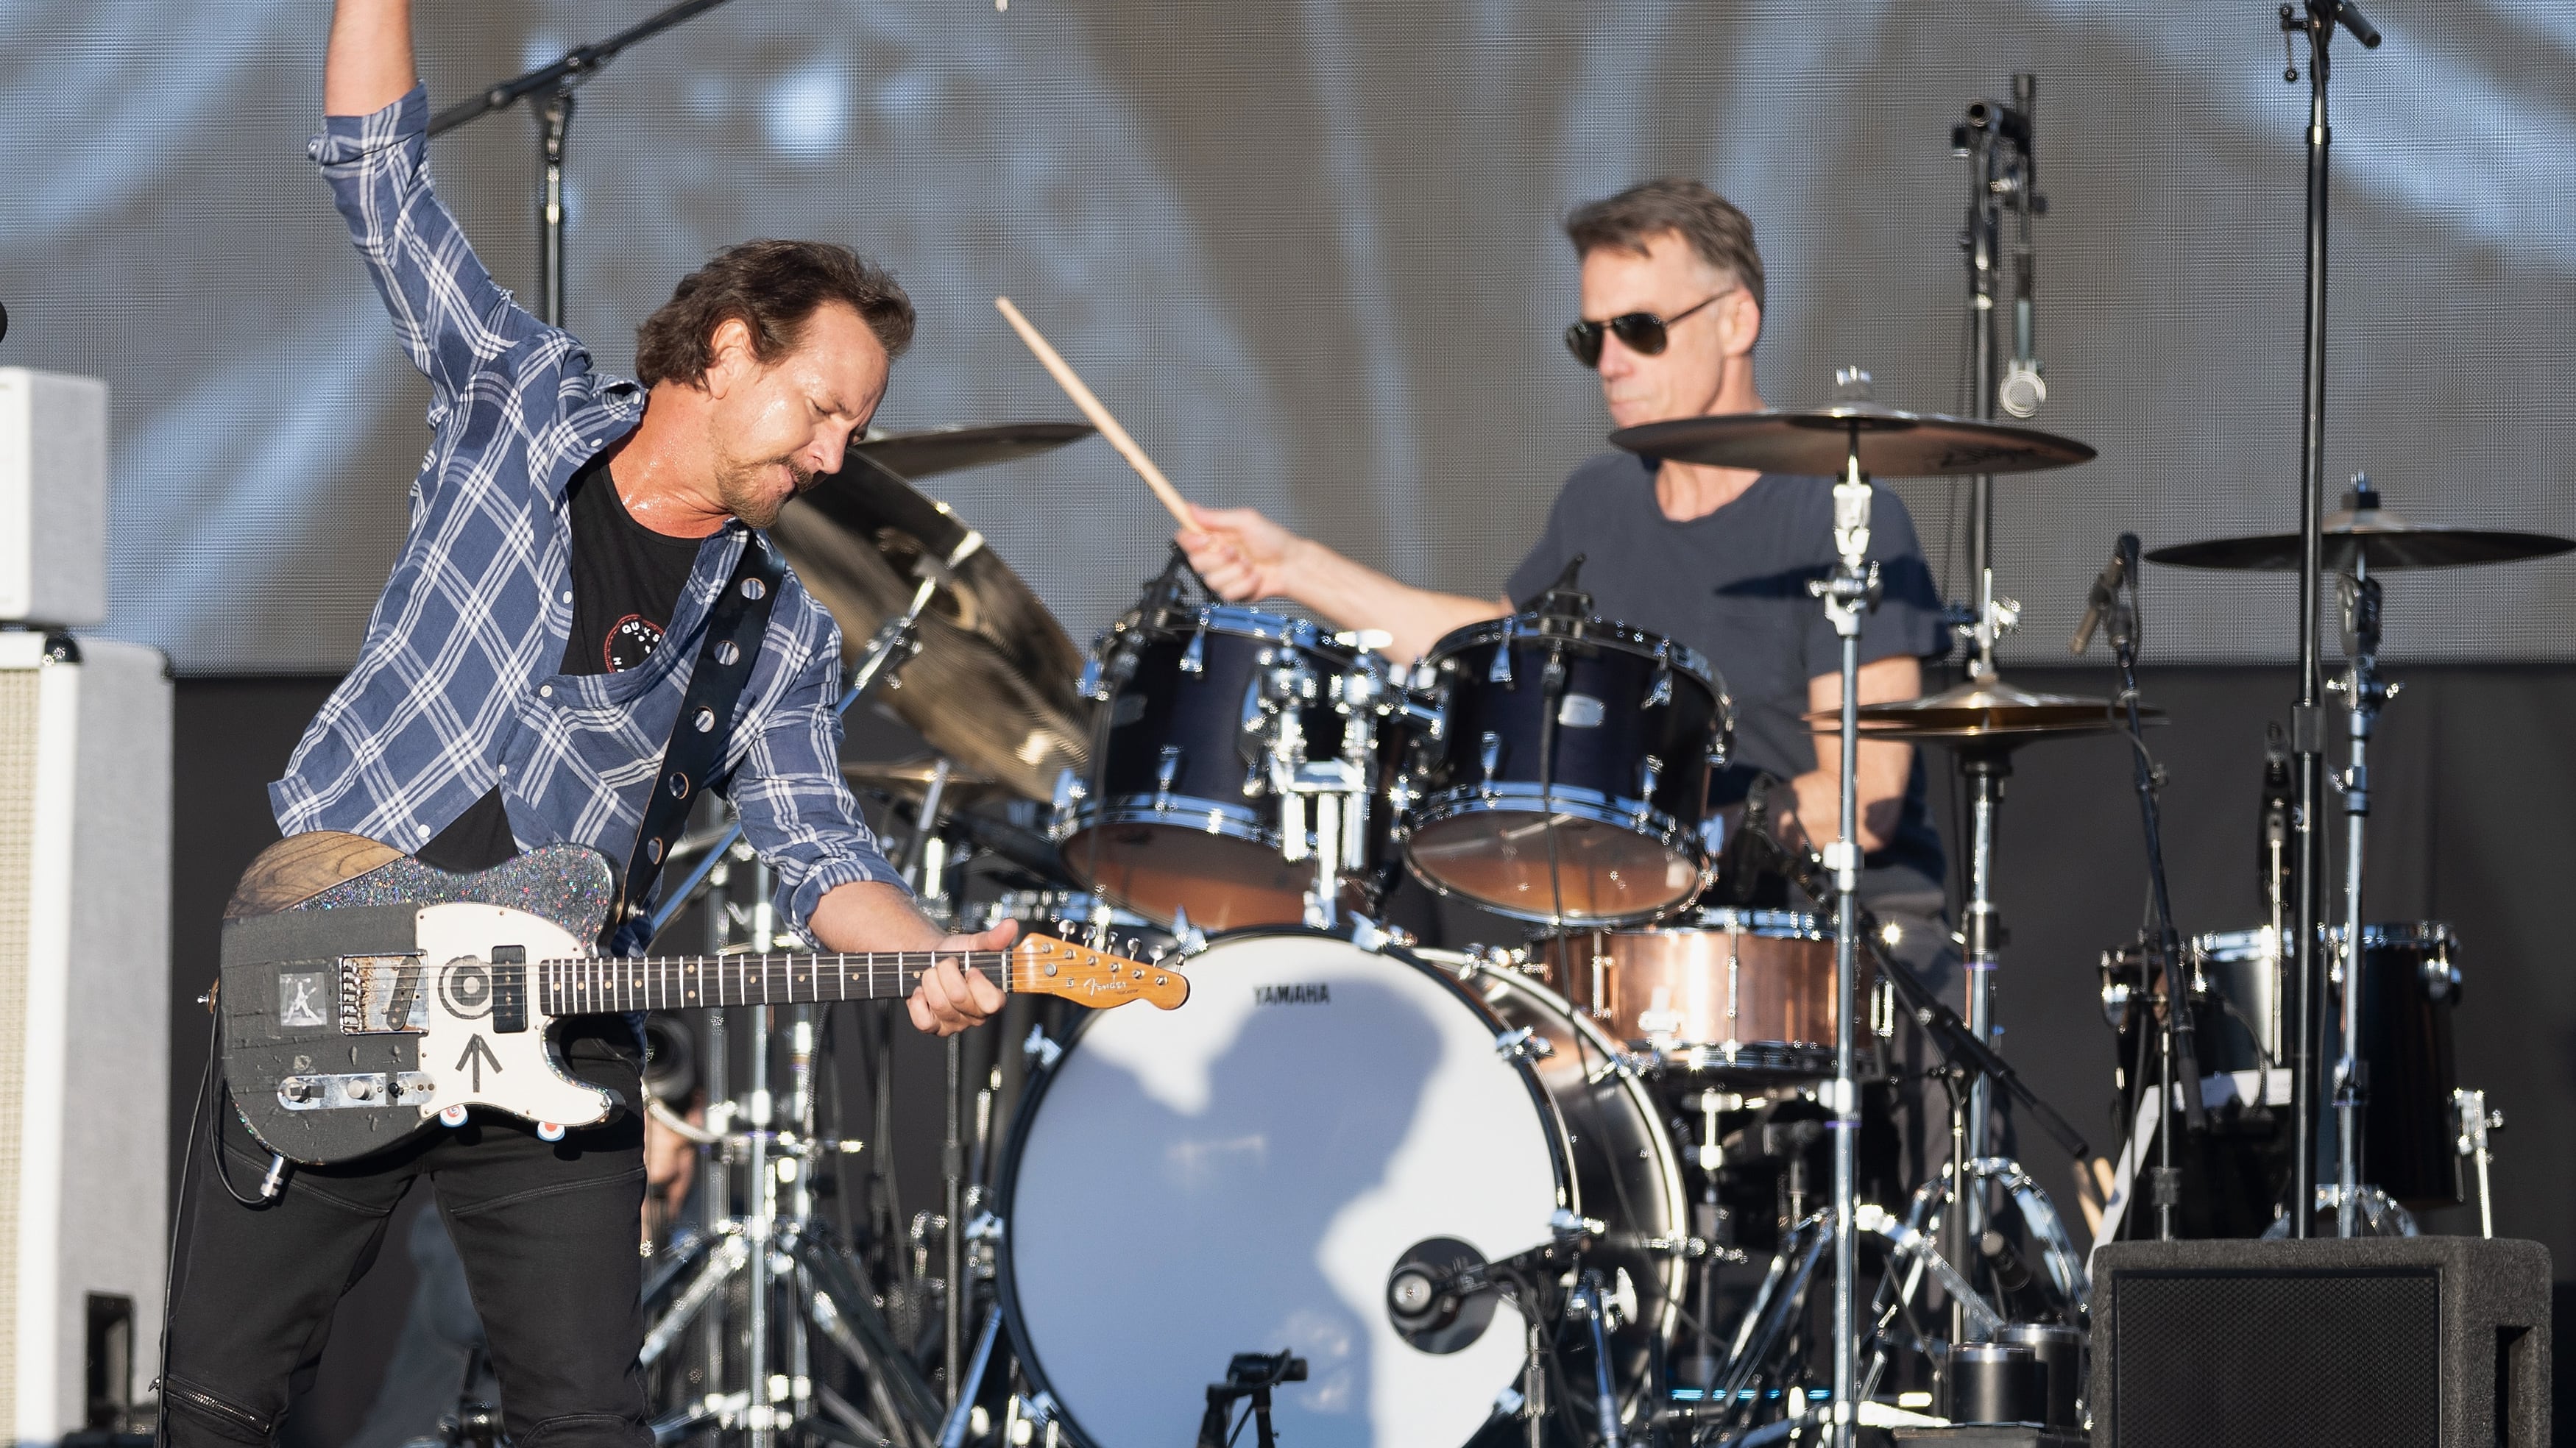 Pearl Jam have cancelled their performance at the Tottenham Hotspur Stadium